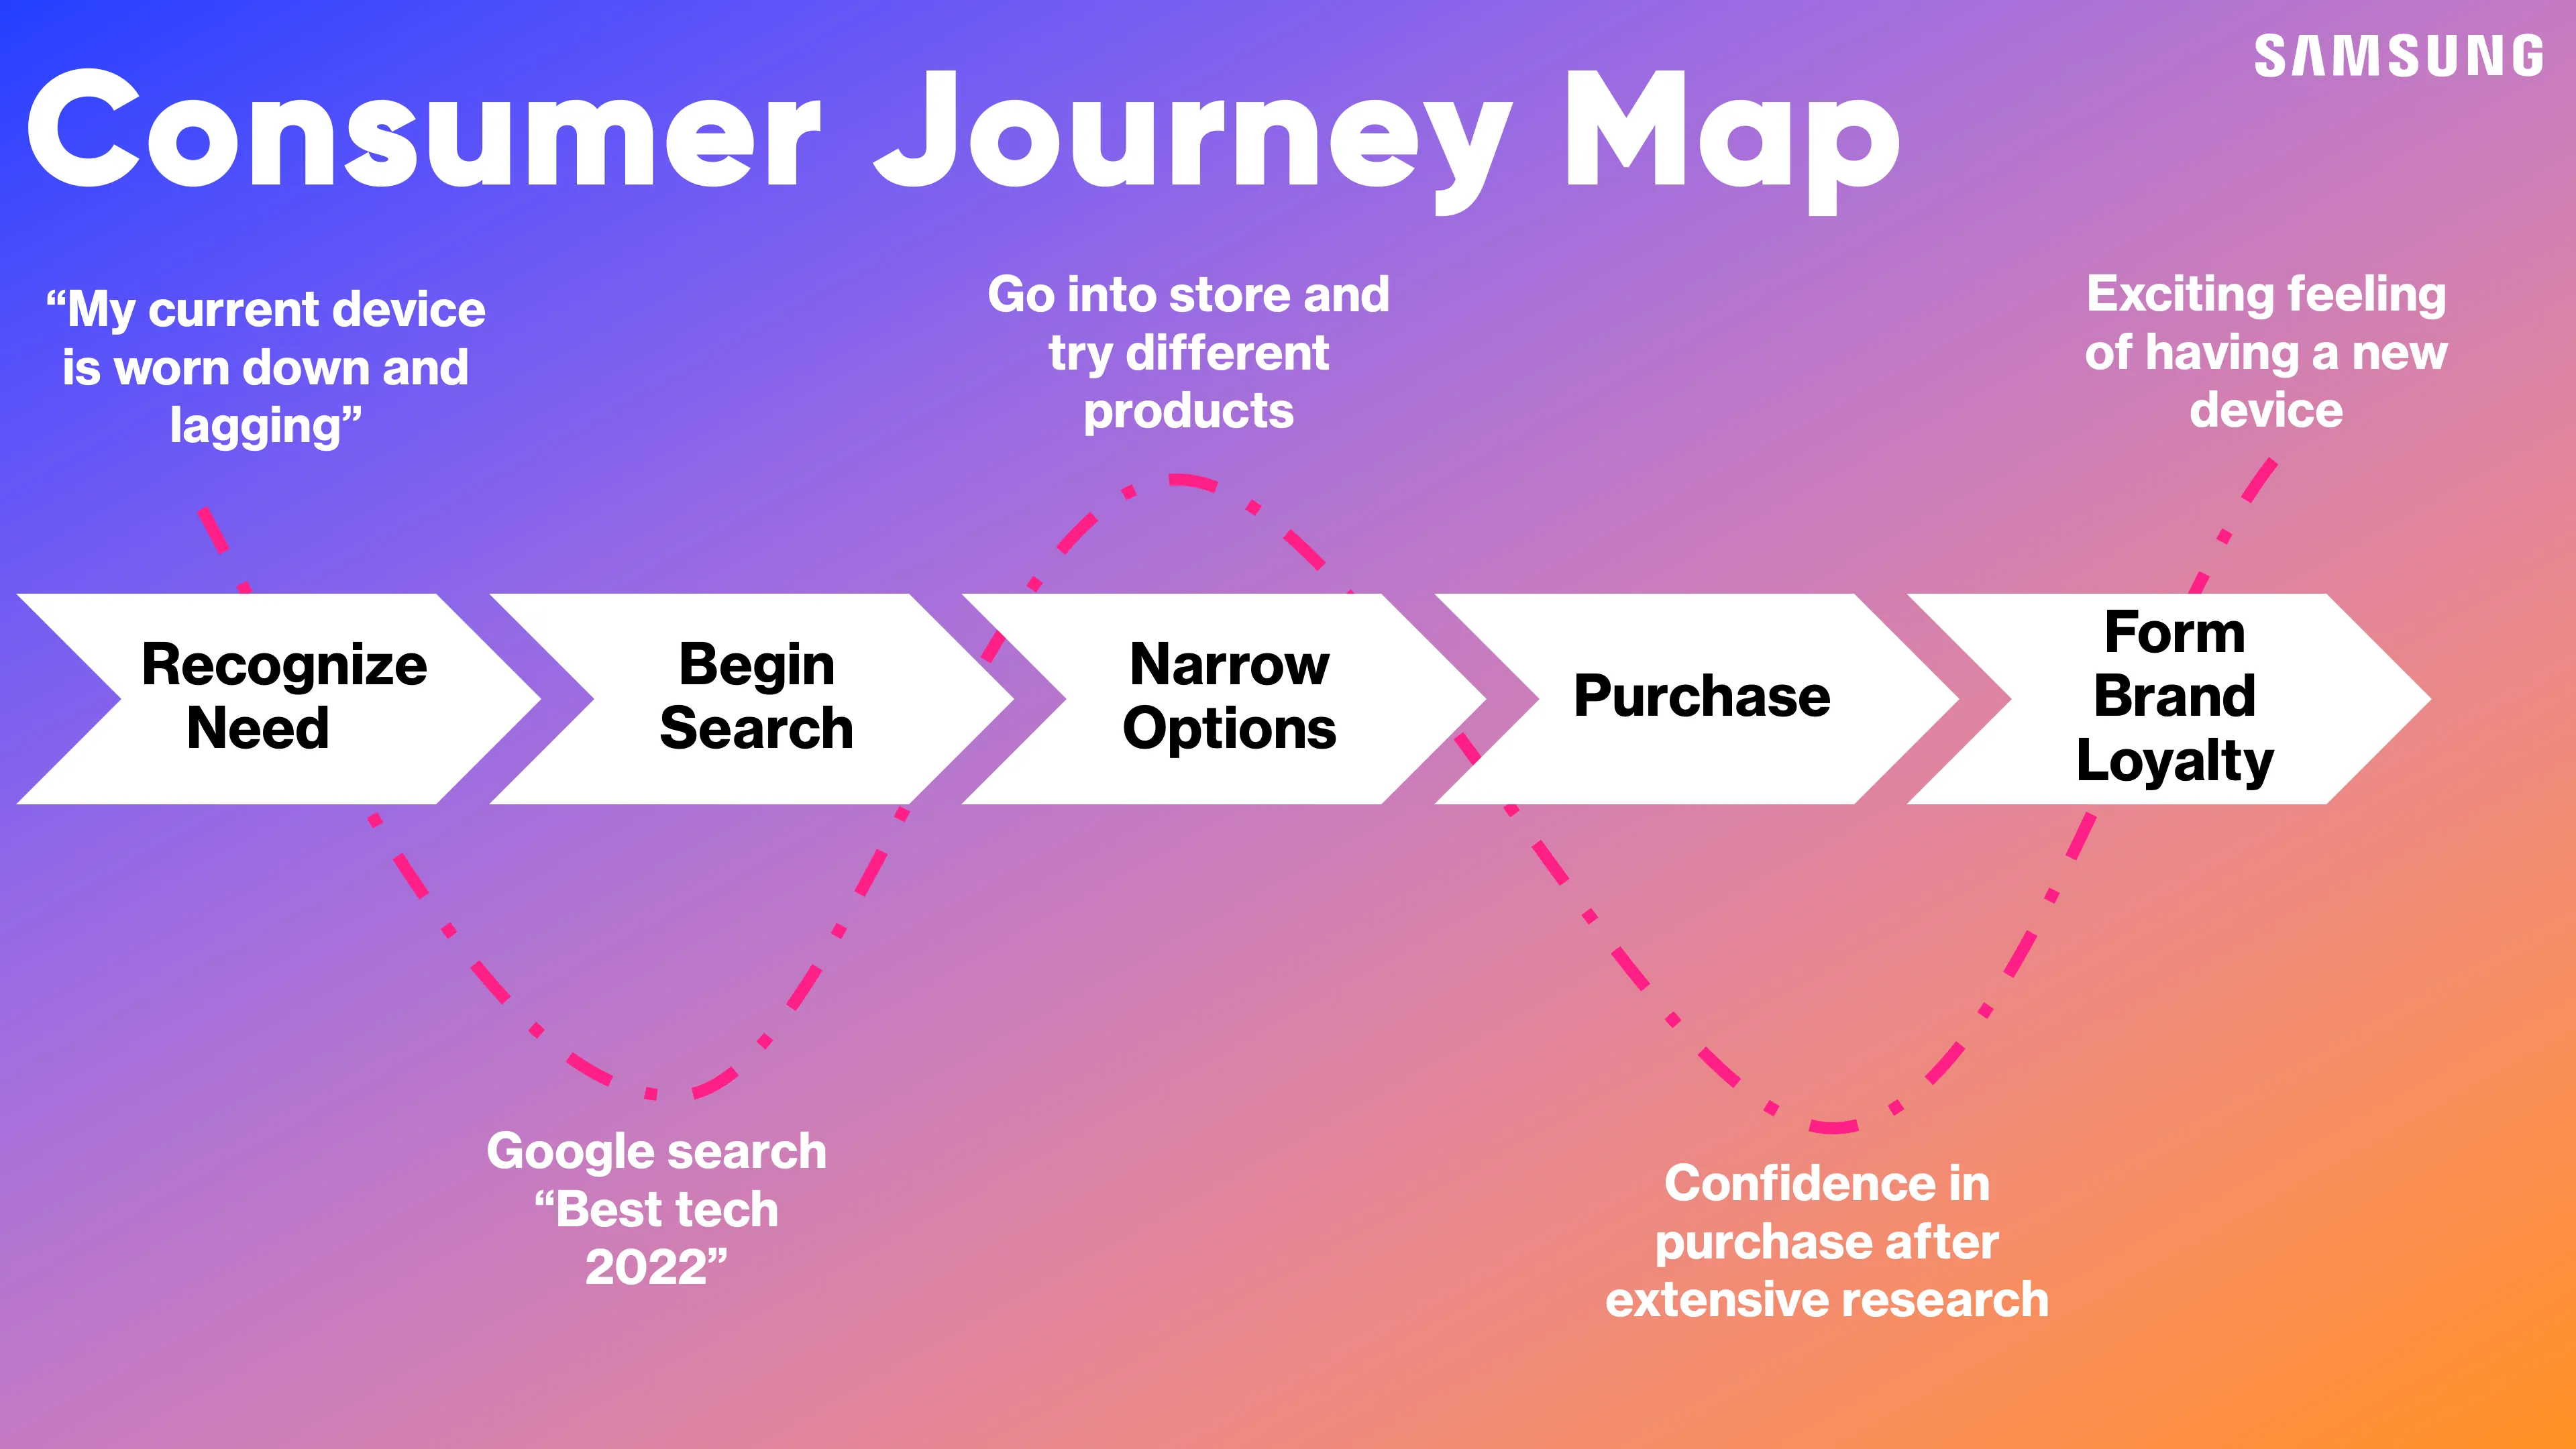 Slide 12, detailing a consumer journey map for purchasing a cell phone.